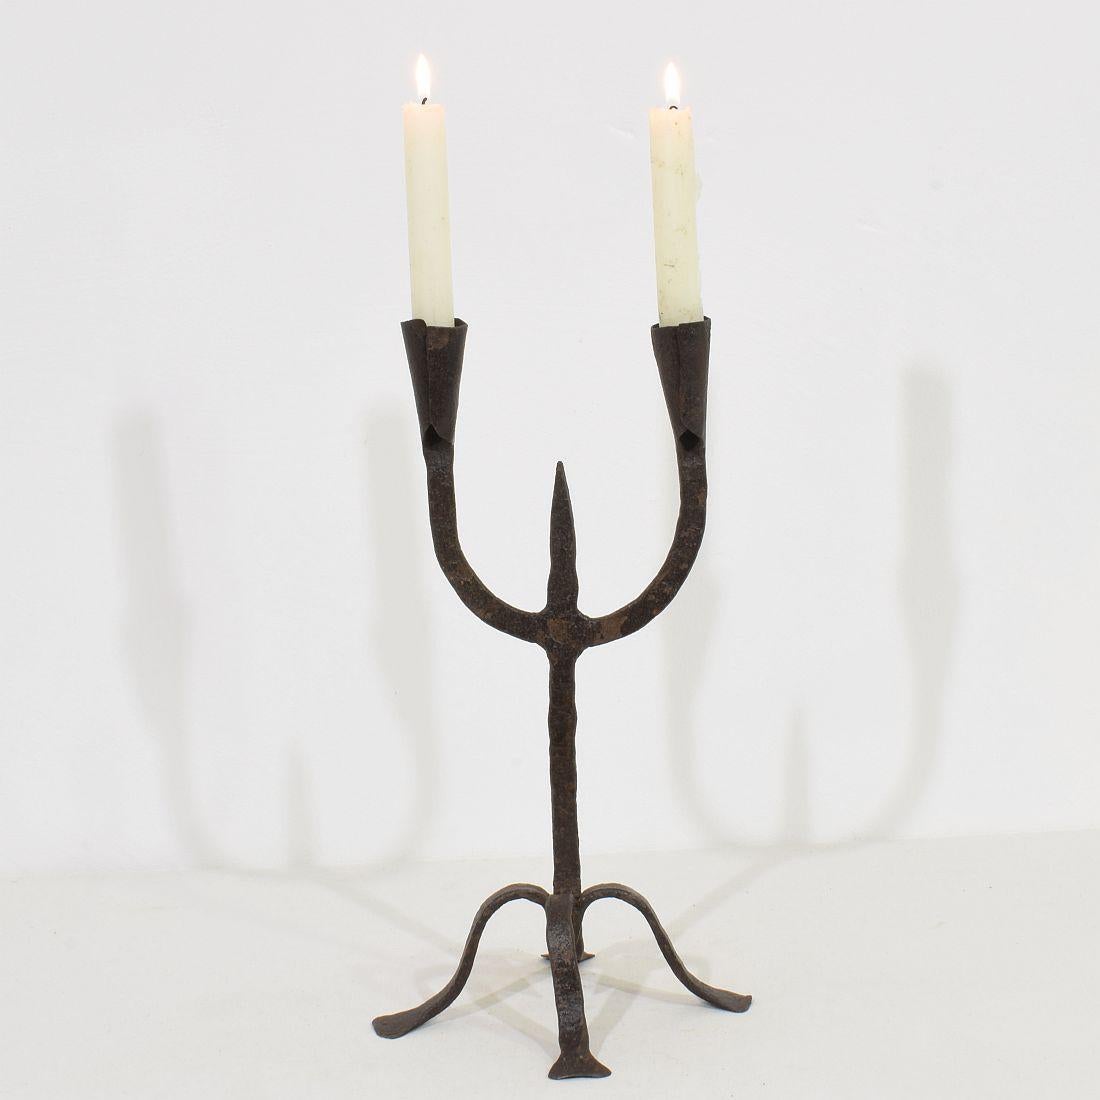 Beautiful 18th-19th century hand forged iron candleholder, Southern France, Spain, 18th-19th century. Weathered.